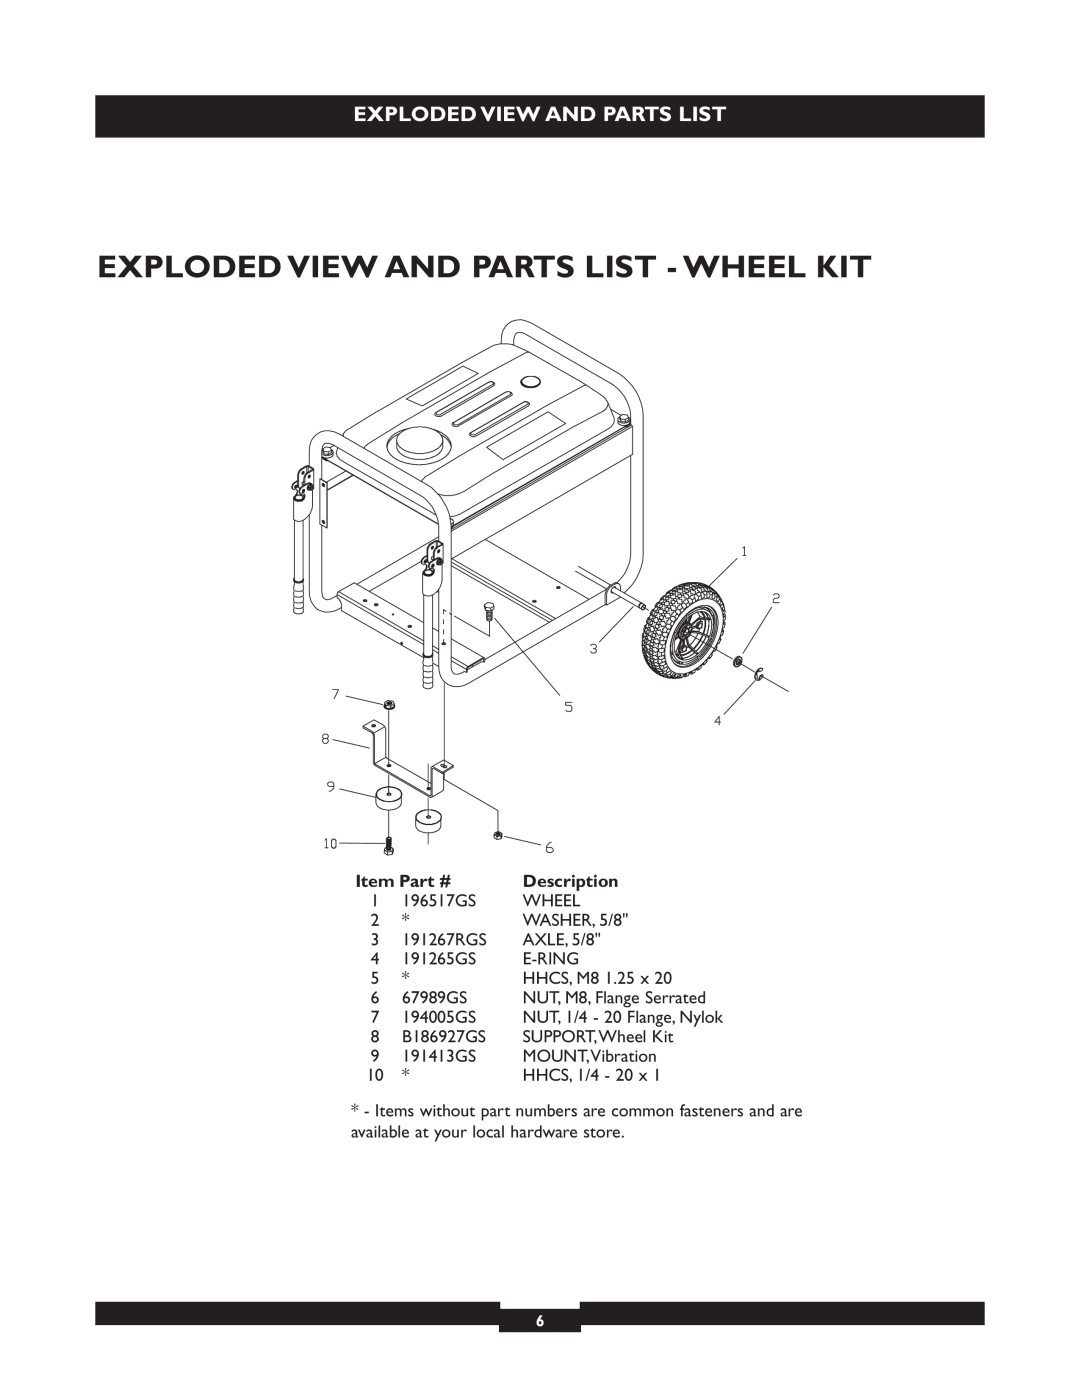 Briggs & Stratton 30254 manual Exploded View And Parts List - Wheel Kit, Description 